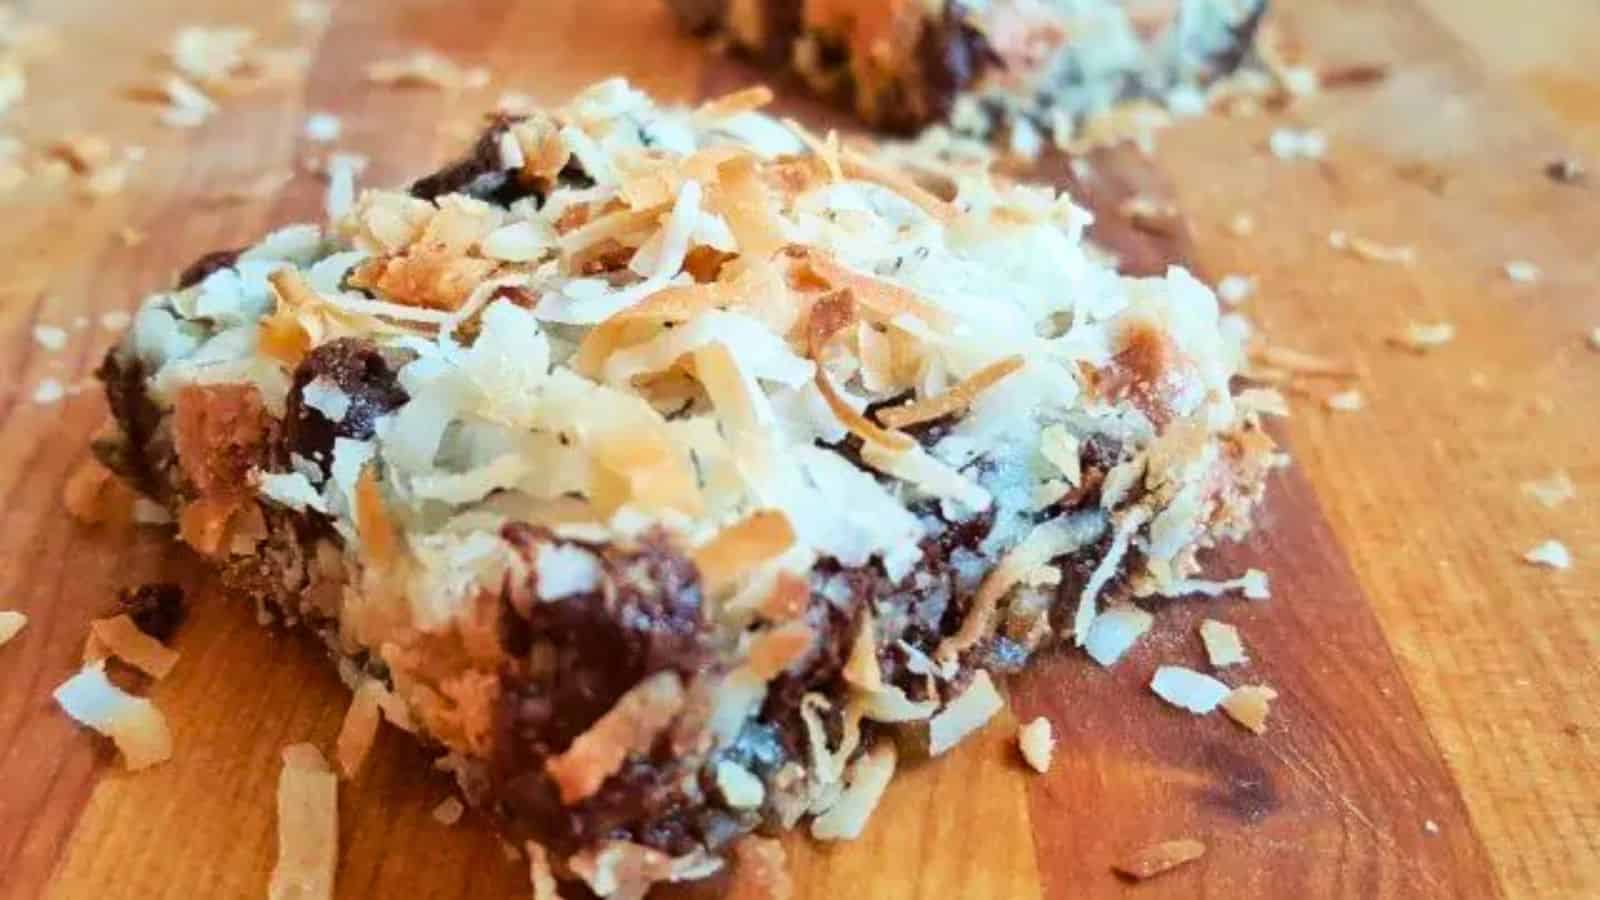 Image shows 7 layer bars on a wooden cutting board.